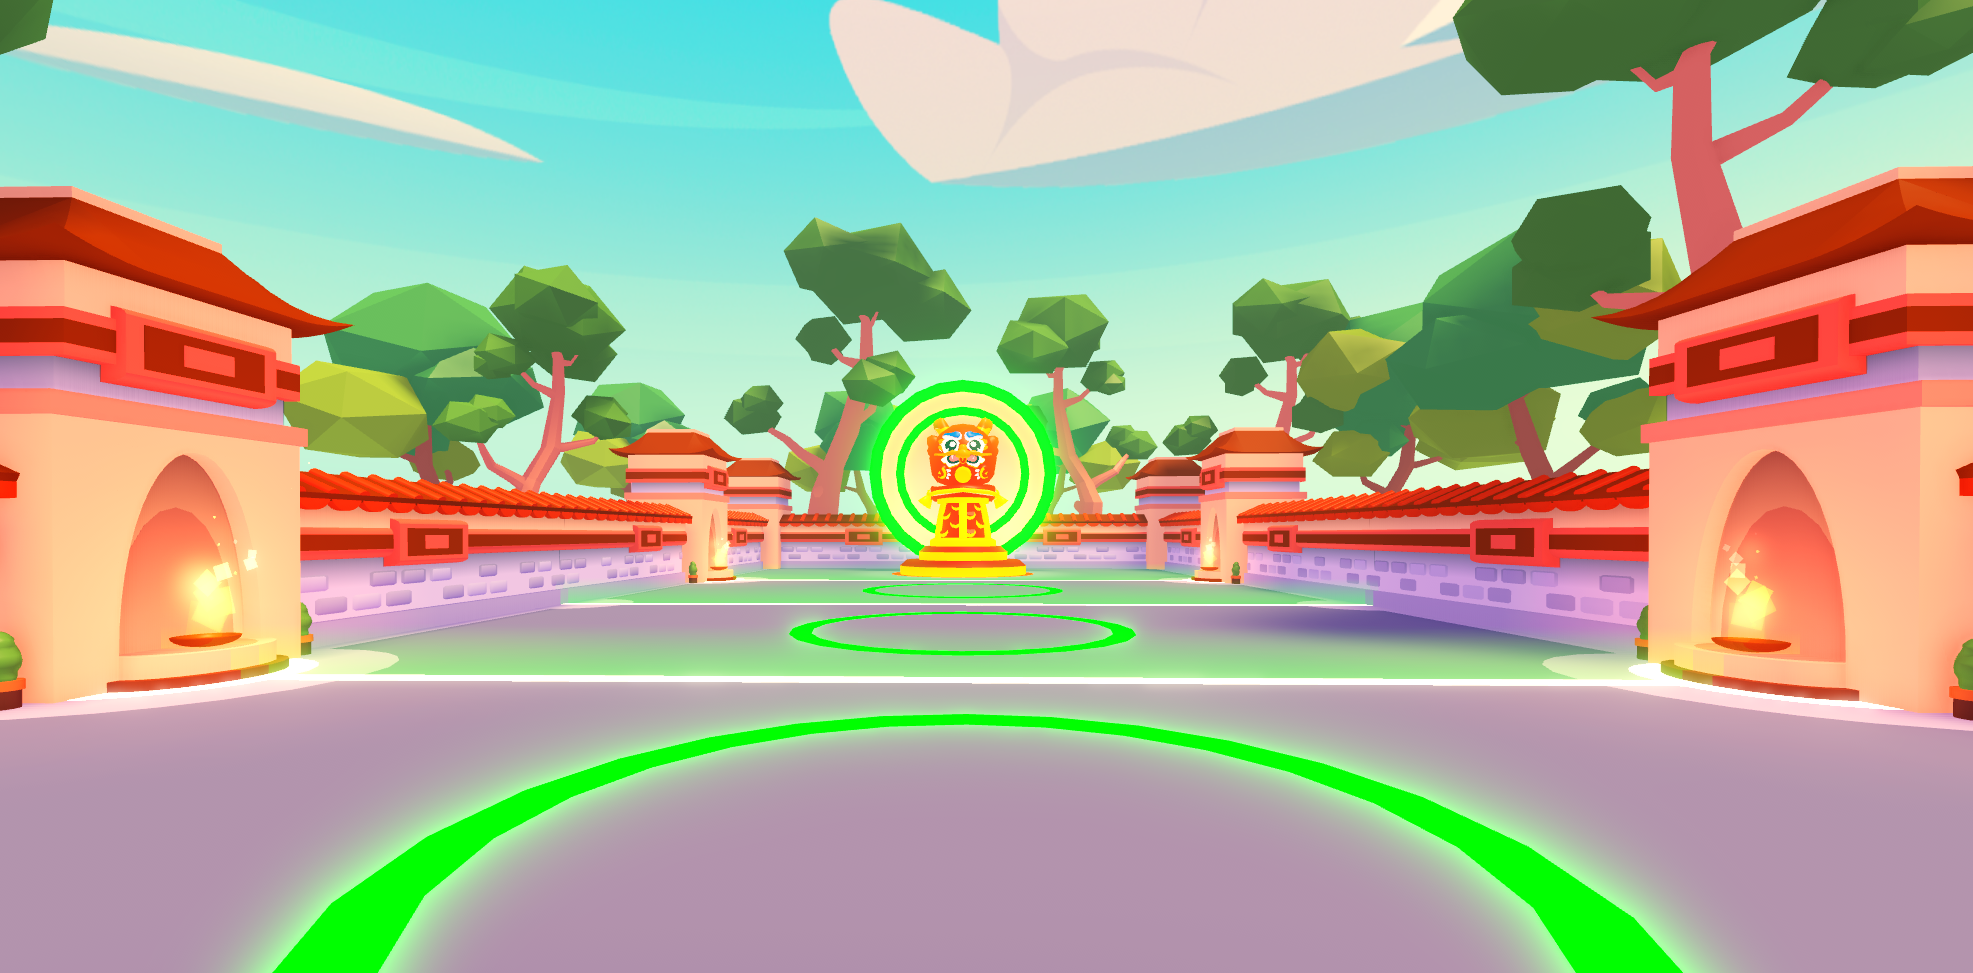 A giant red dragon statue towers over a grey arena lit up with green circles and lines. The arena is surrounded by stone walls and overlooked by trees.